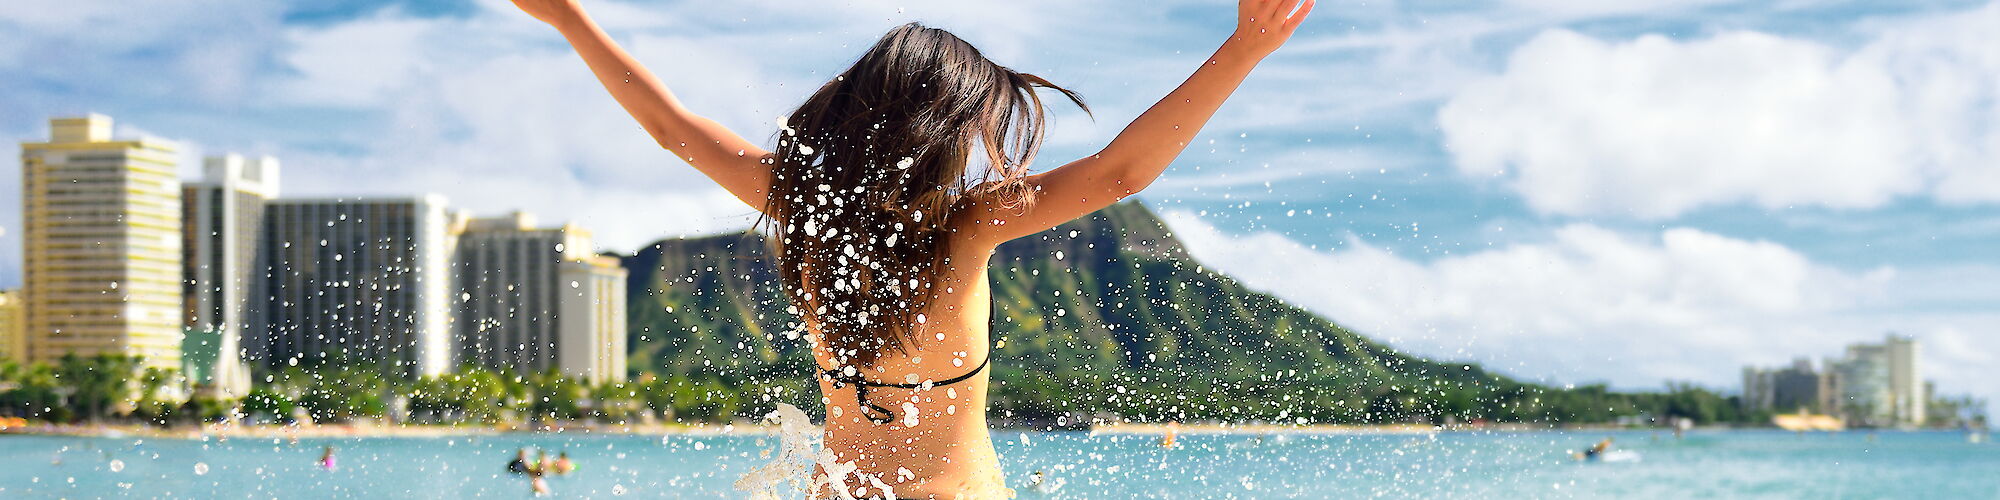 A person in a bikini splashing in the ocean, facing away from the camera with arms raised, city skyline and mountains in the background.